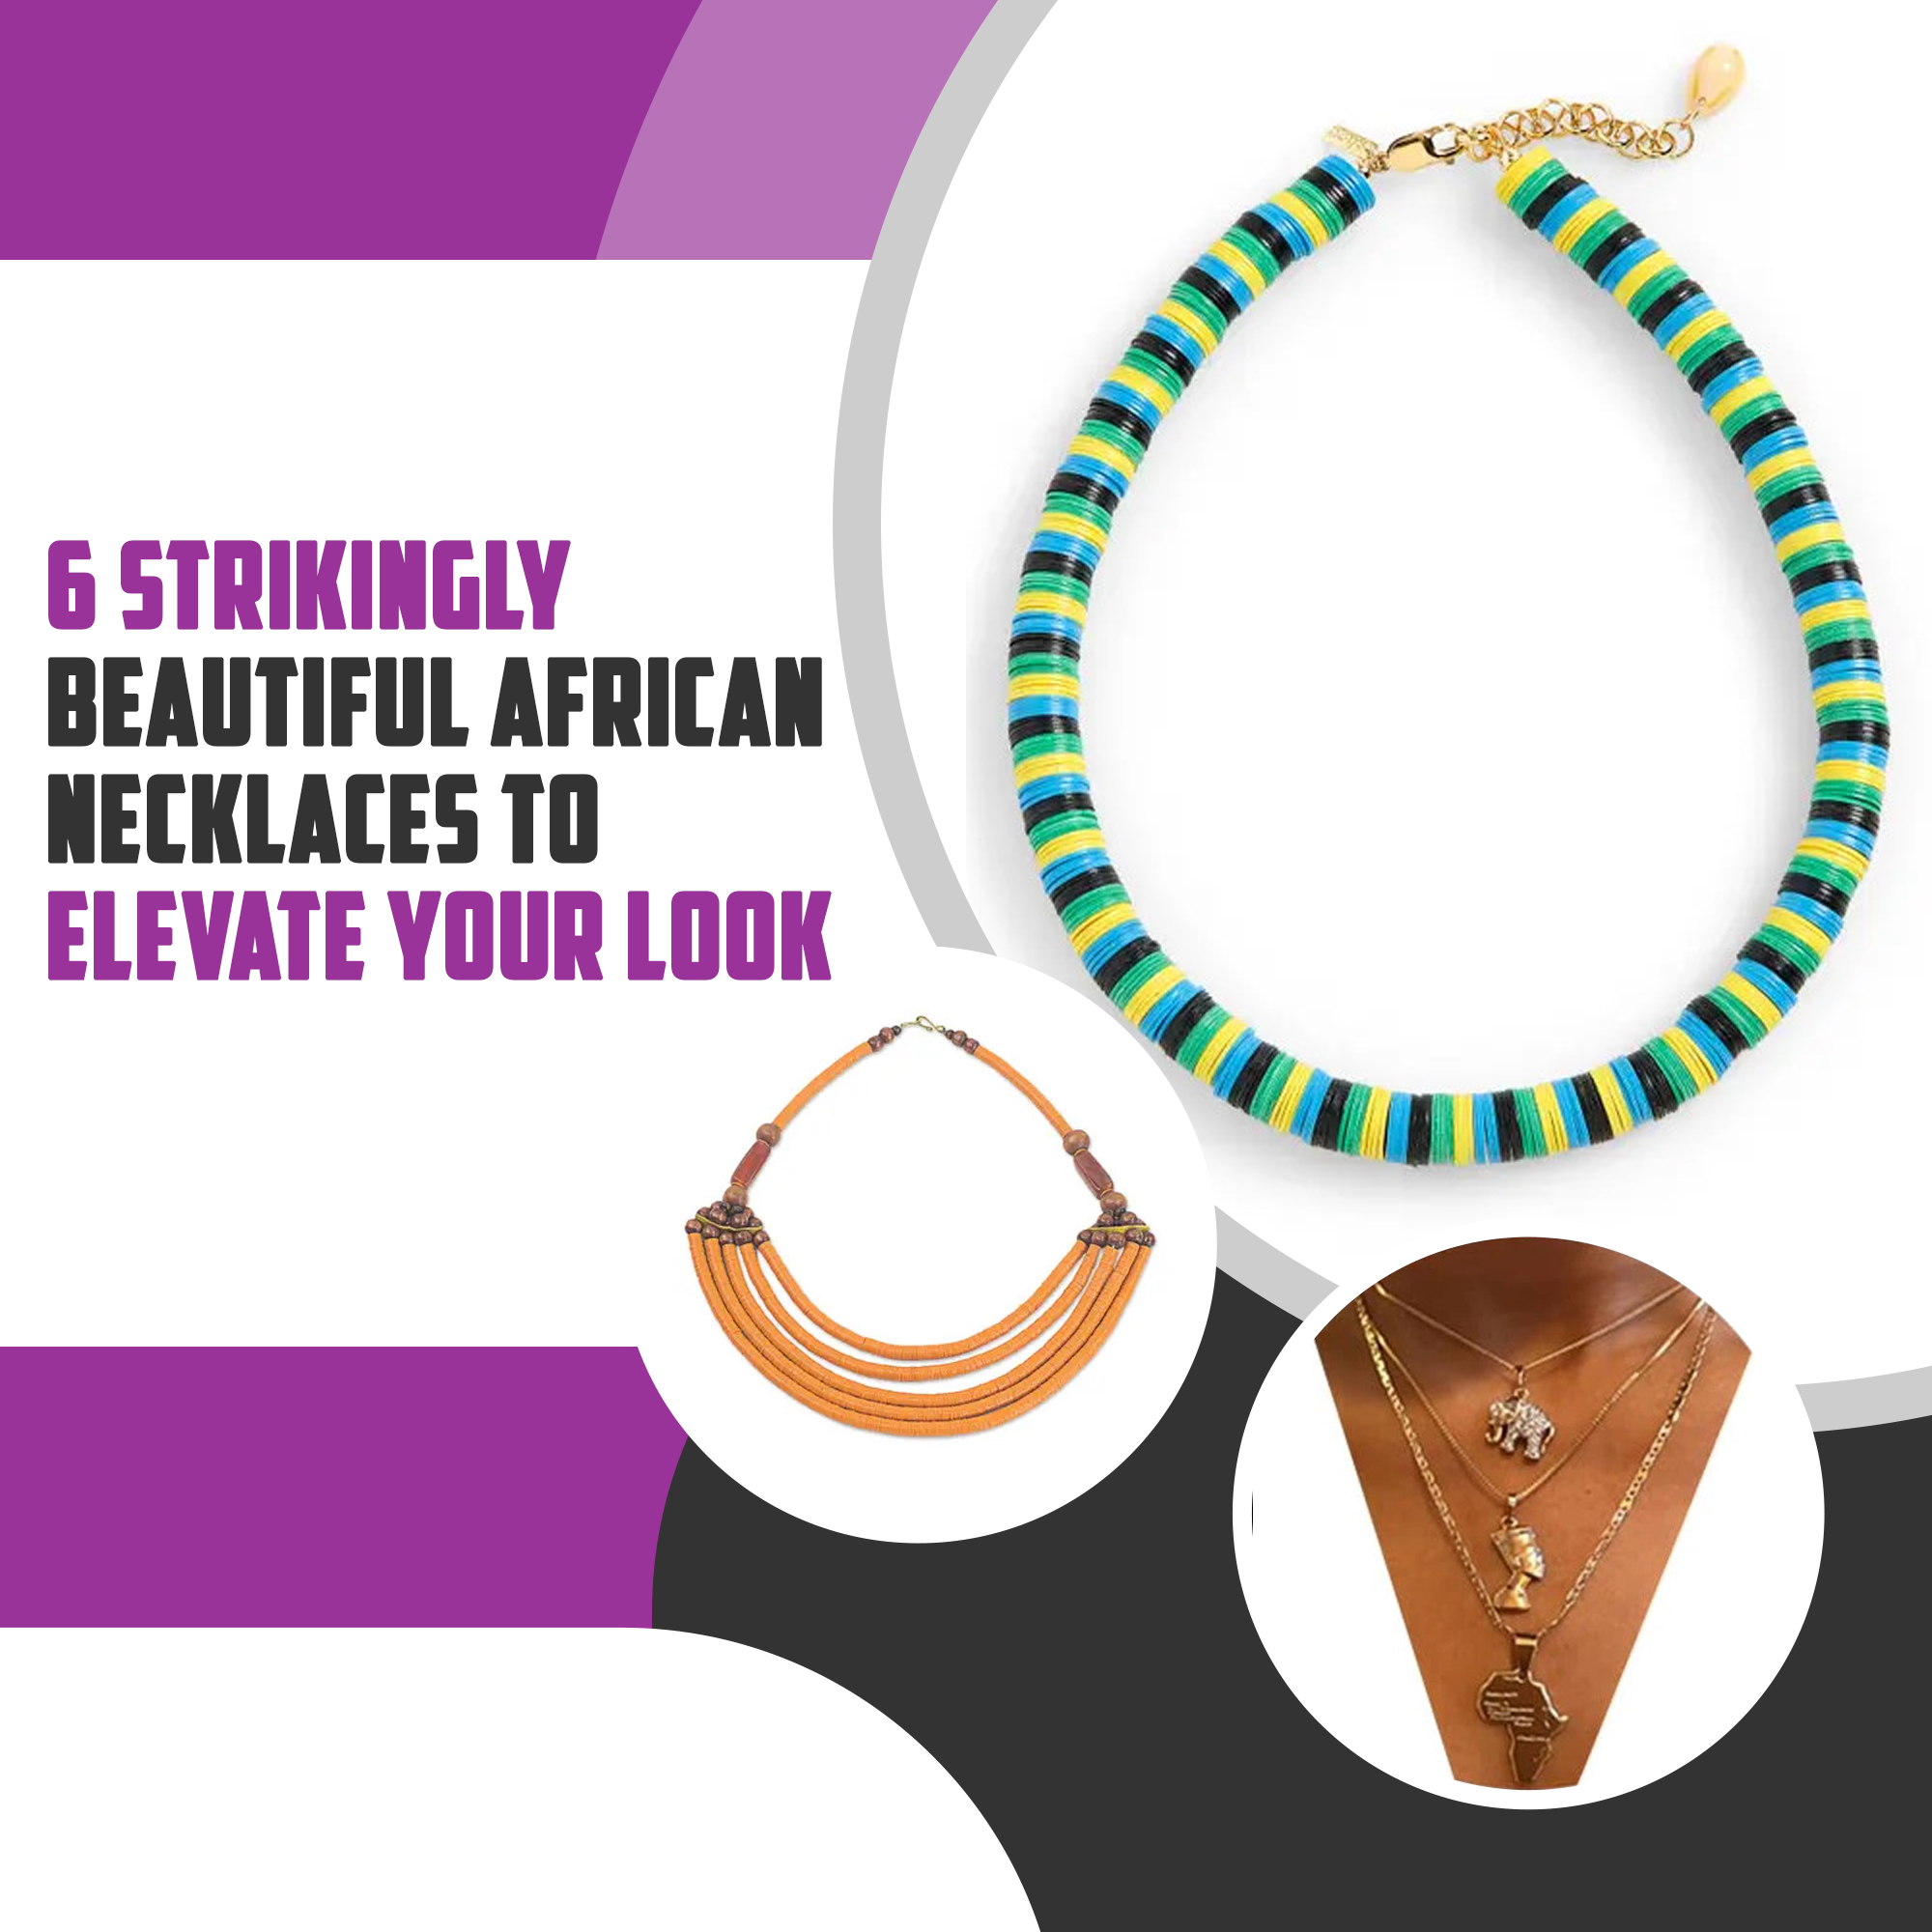 6 Strikingly Beautiful African Necklaces to Elevate Your Look